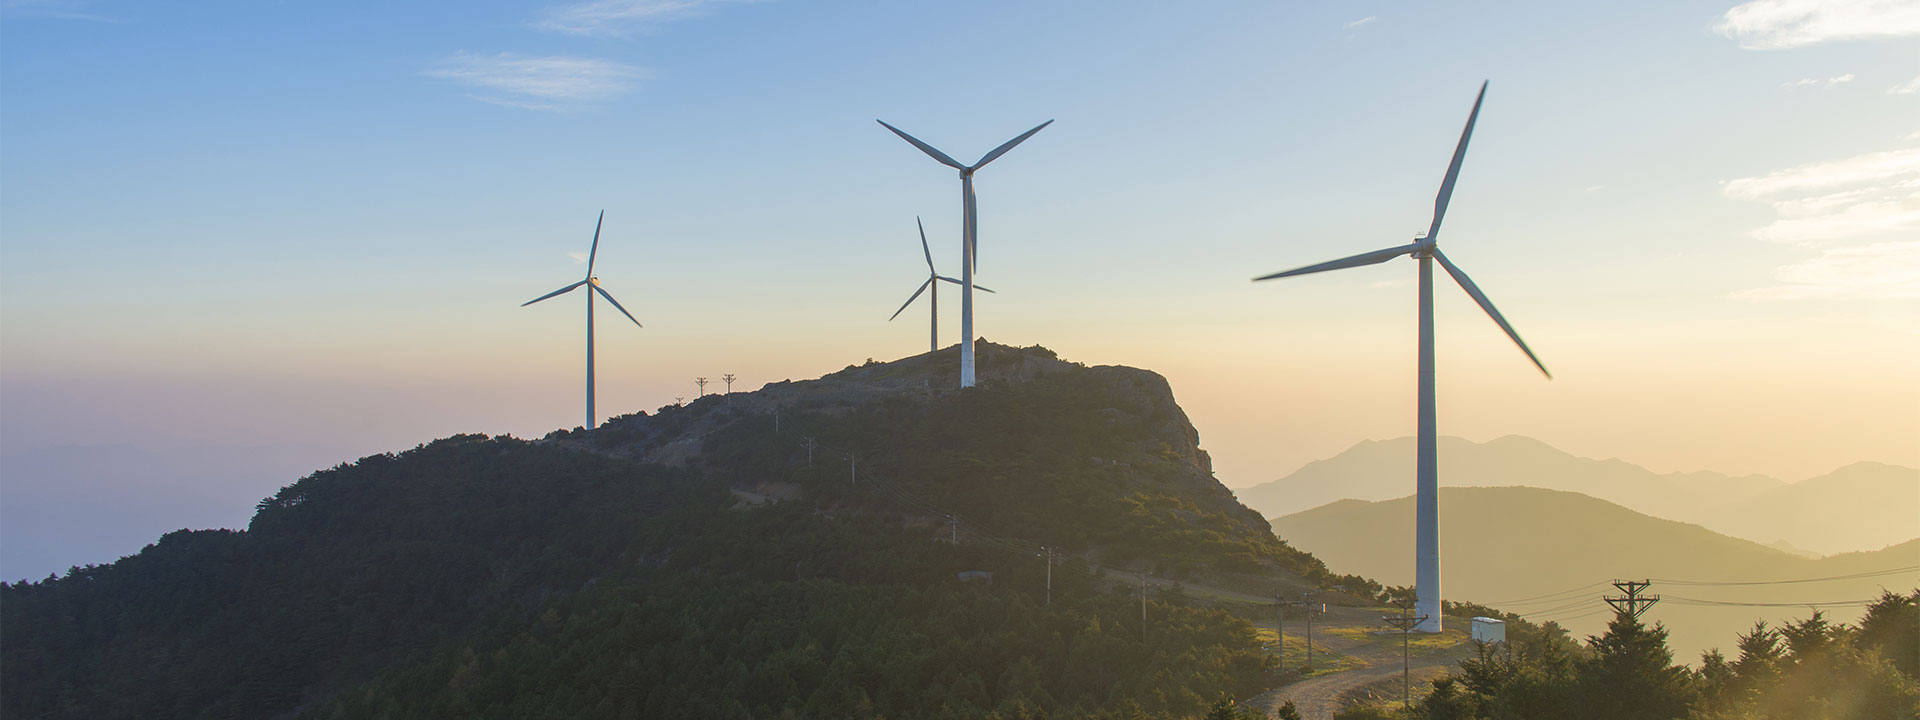 Image of windmills on a mountain